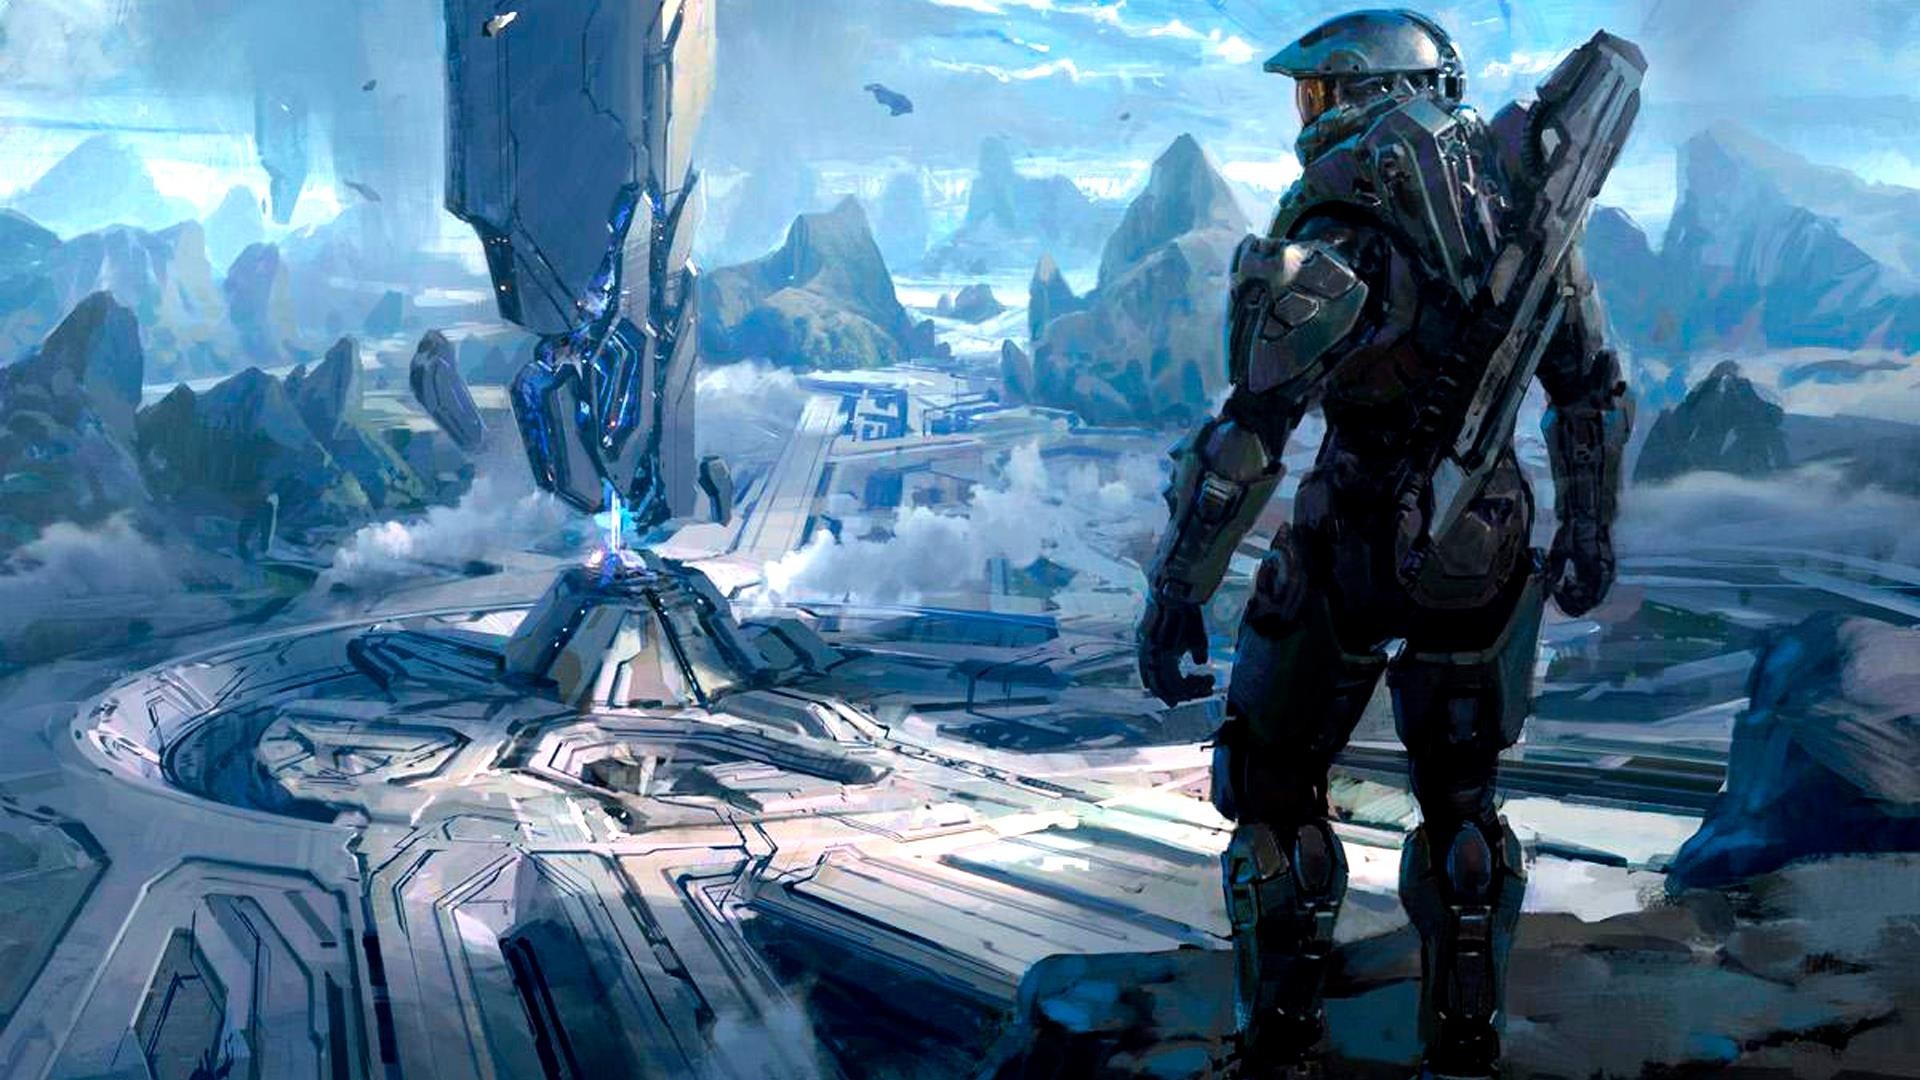 Video Games Halo Halo 4 Master Chief Video Games 343 Industries Science Fiction Spartans Halo 1920x1080